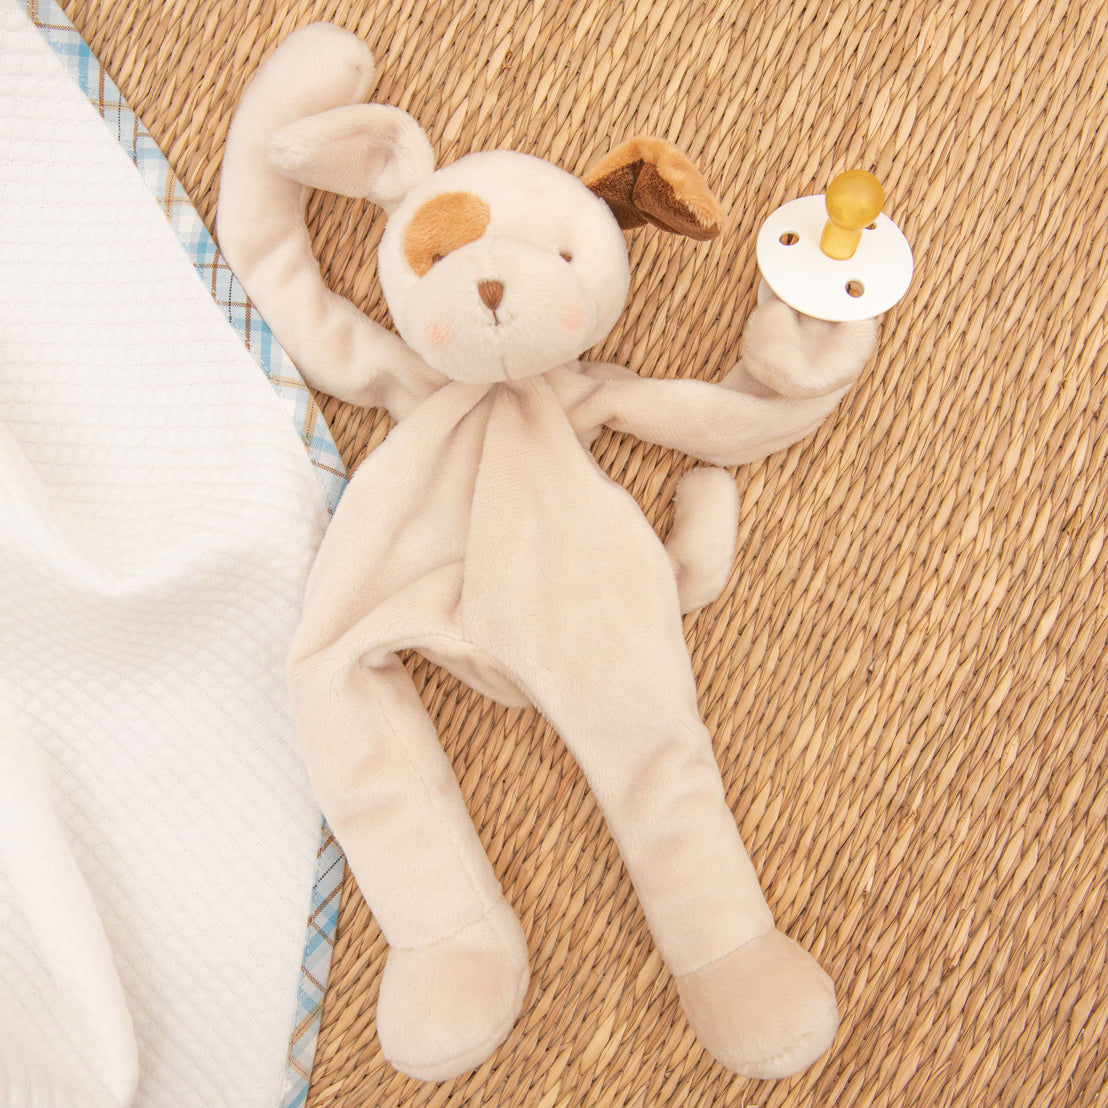 A Mason Puppy Buddy toy and Pacifier on a wicker surface, partially covered by a white baby blanket with a blue patterned trim.